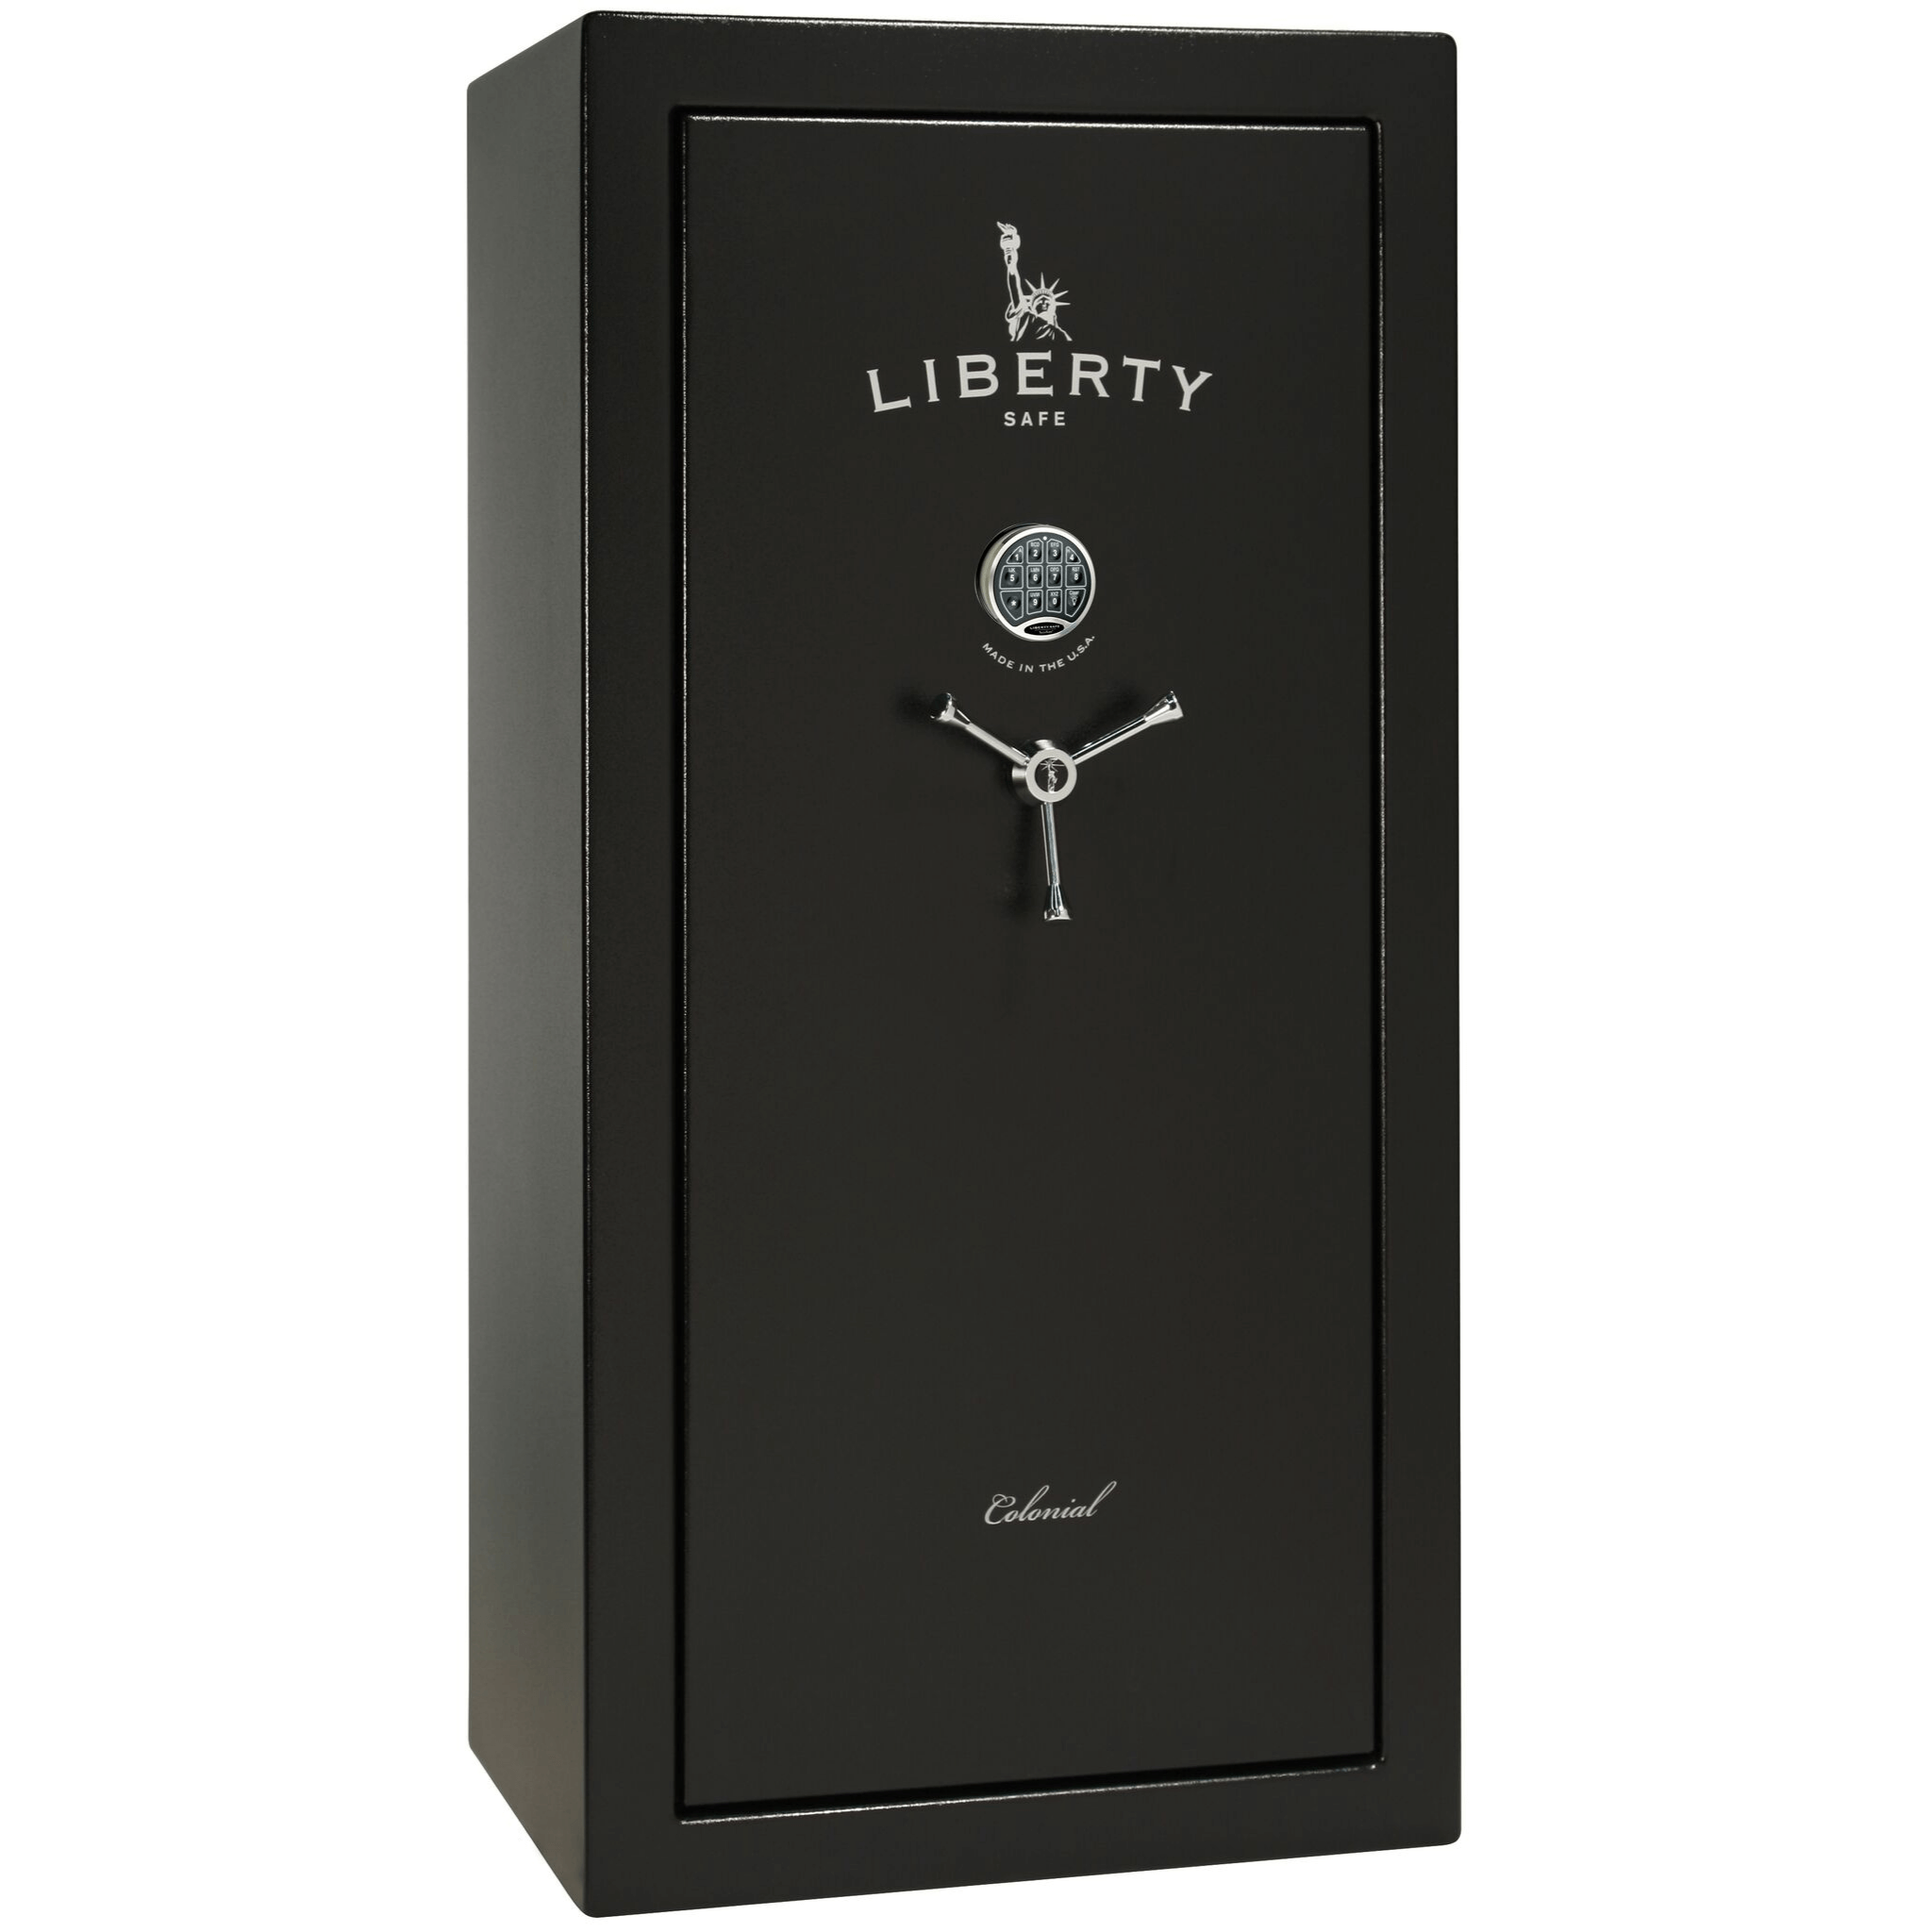 Colonial Series | Level 3 Security | 75 Minute Fire Protection | 23 | DIMENSIONS: 60.5"(H) X 30"(W) X 25"(D) | Black Textured | Electronic Lock, photo 3